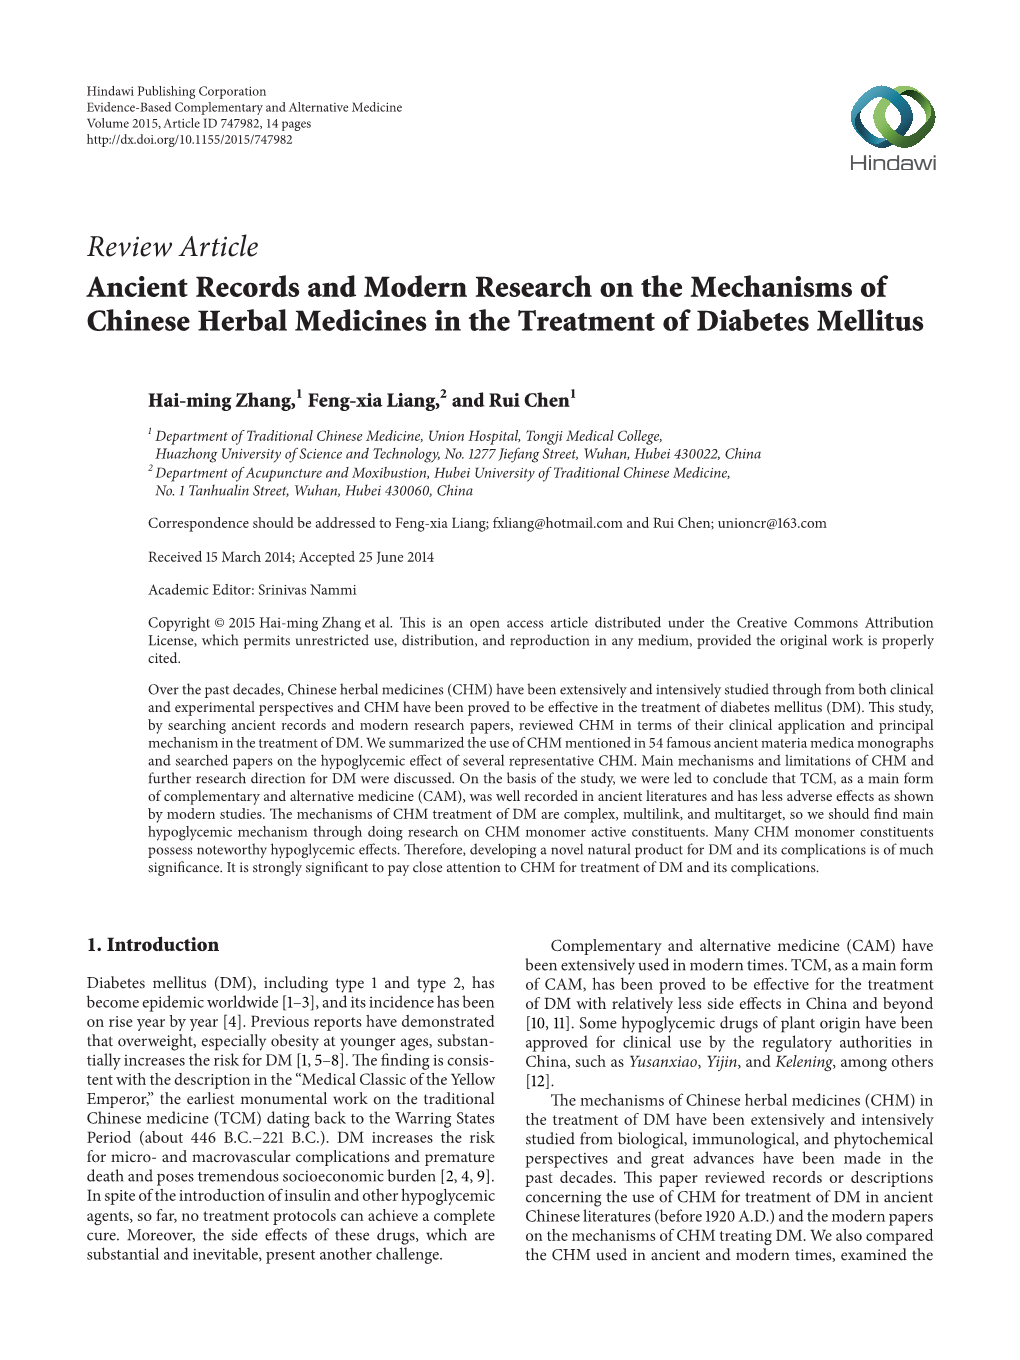 Ancient Records and Modern Research on the Mechanisms of Chinese Herbal Medicines in the Treatment of Diabetes Mellitus